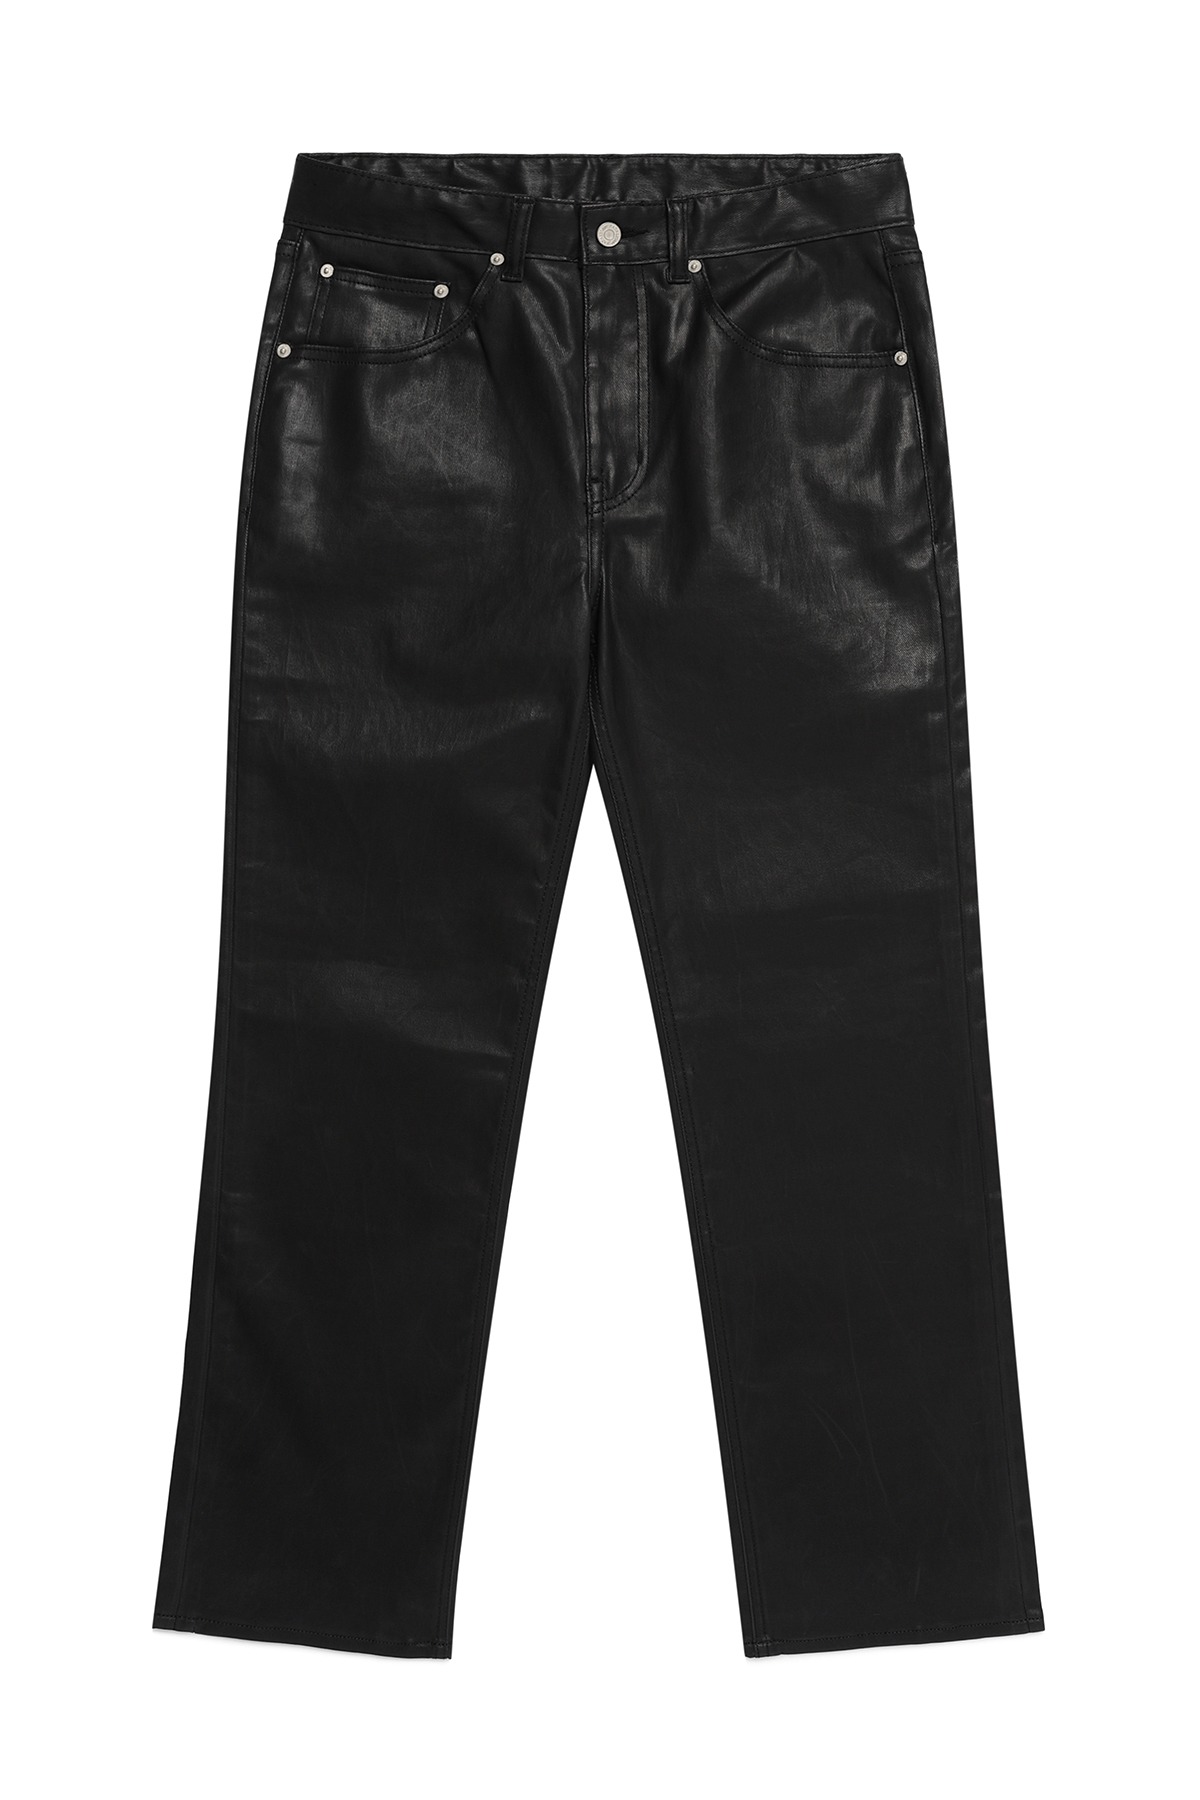 #0335 Carbon coated semi wide jeans